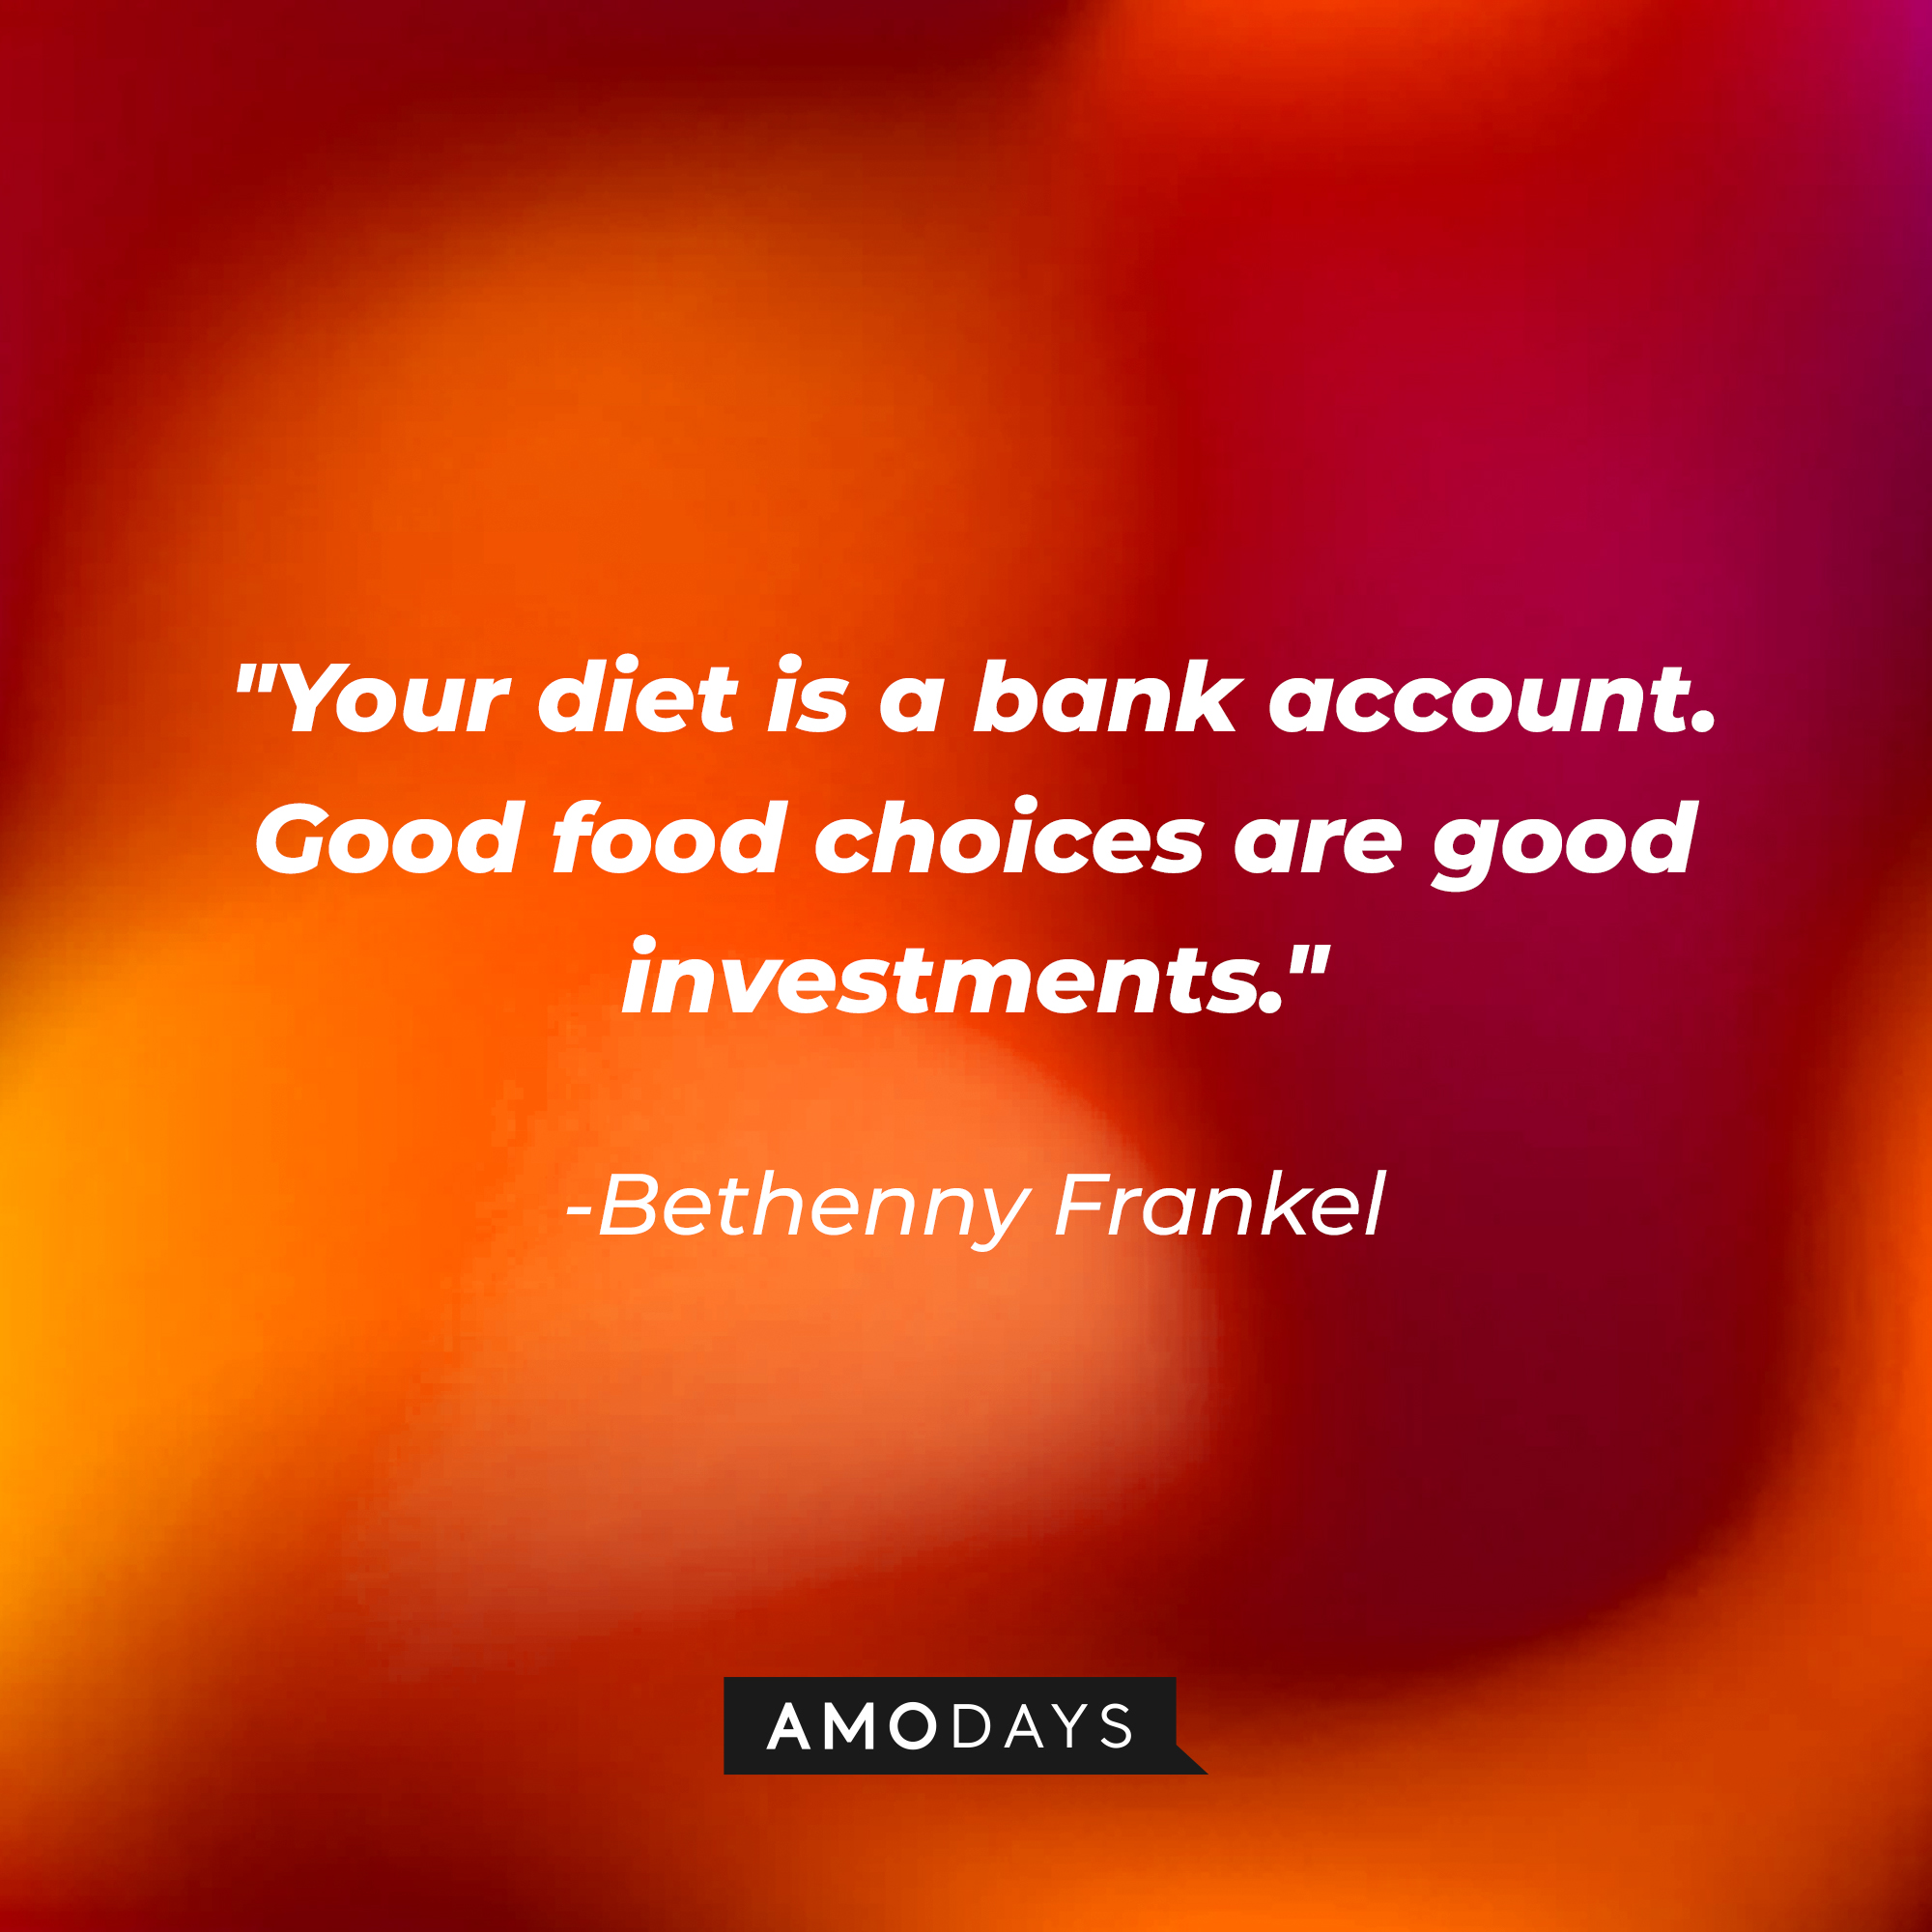 Bethenny Frankel's quote: “Your diet is a bank account. Good food choices are good investments.” | Source: Amodays